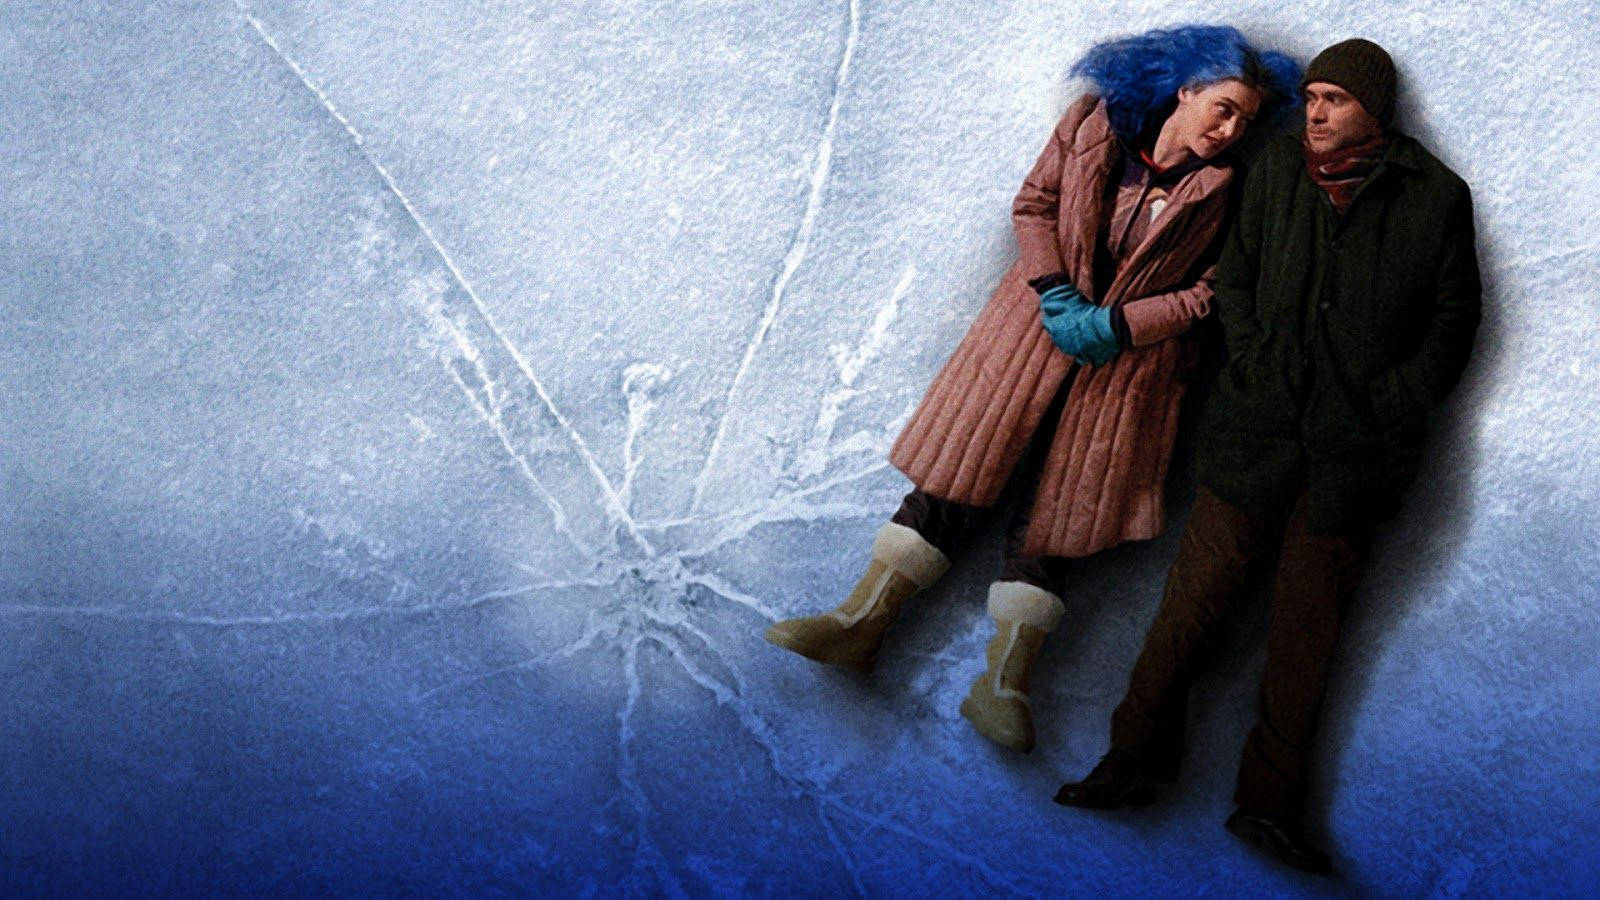 Eternal Sunshine Of The Spotless Mind Couple Movie Poster Background